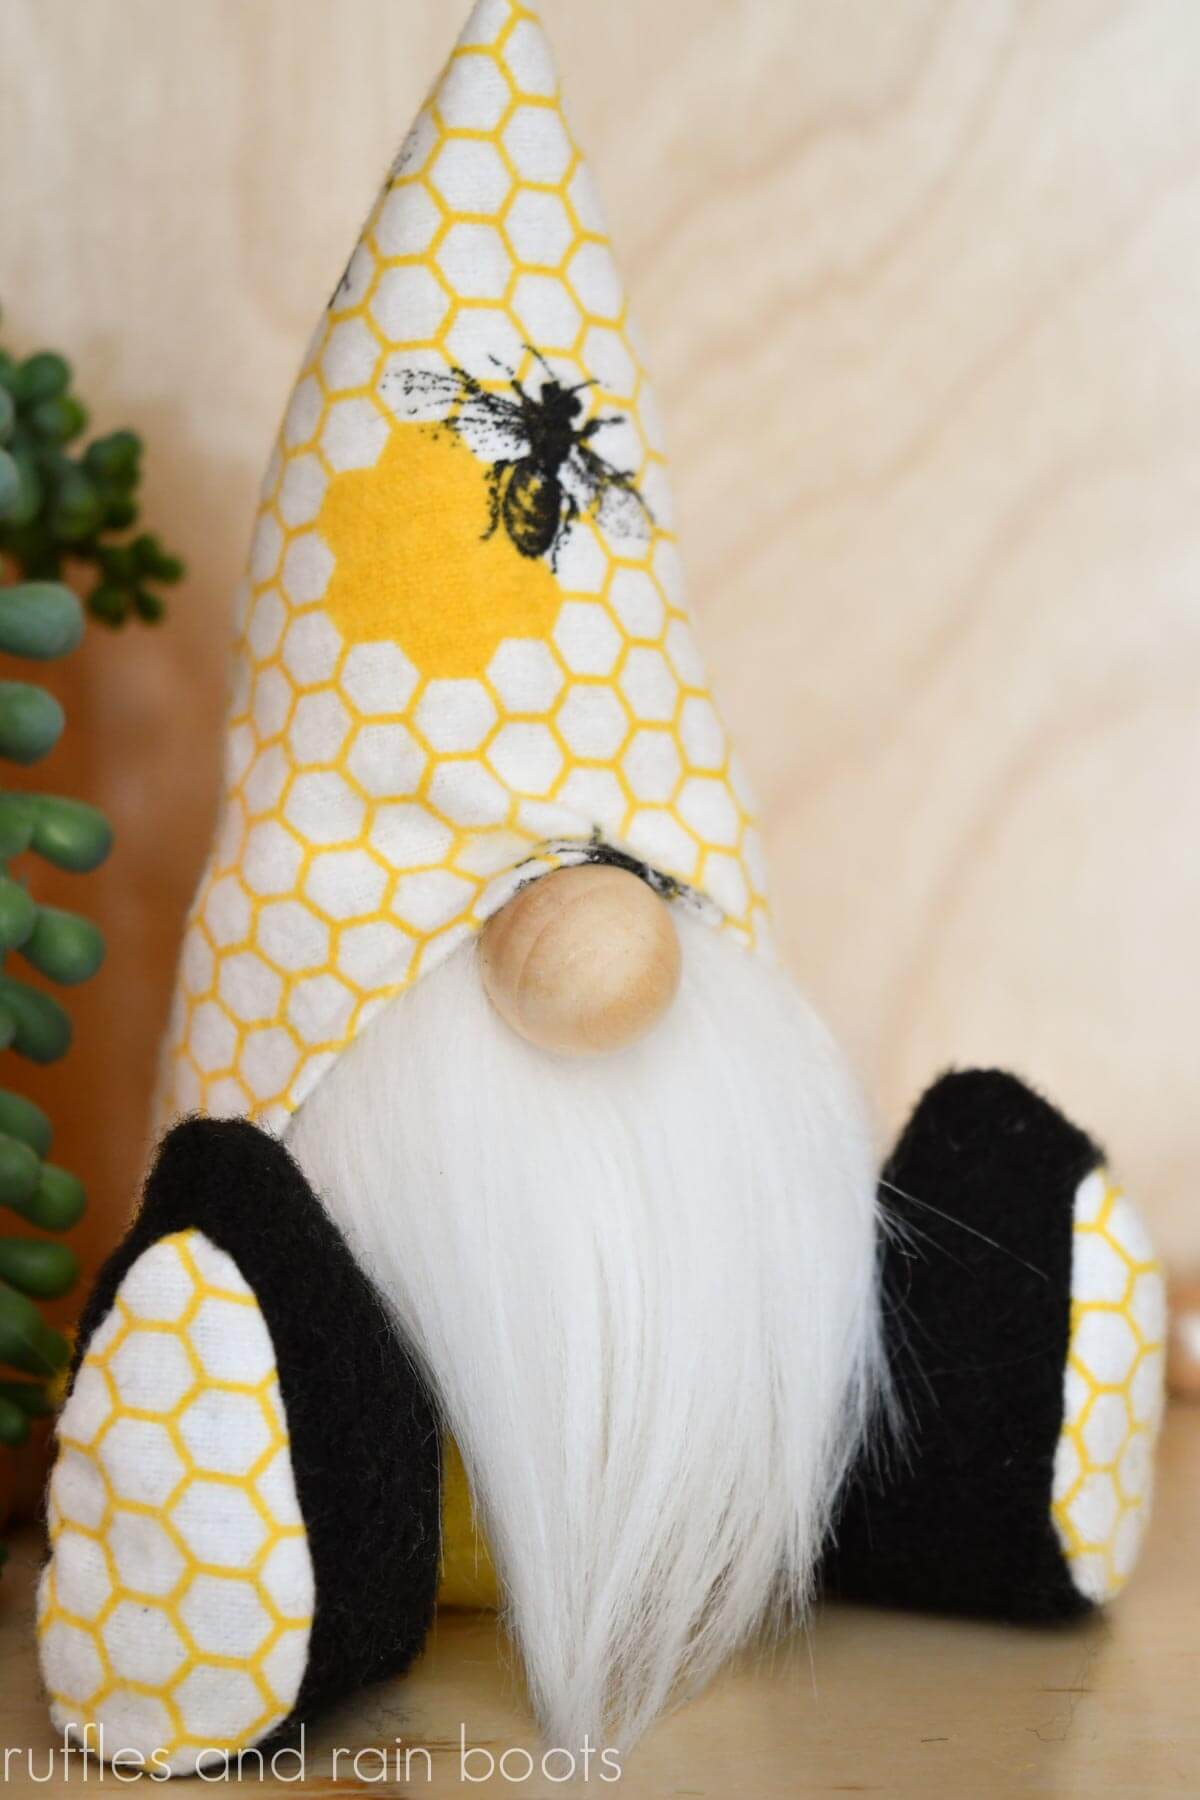 Vertical image of a tiered tray gnome made with bee flannel fabric sitting on a wood background with succulent behind.